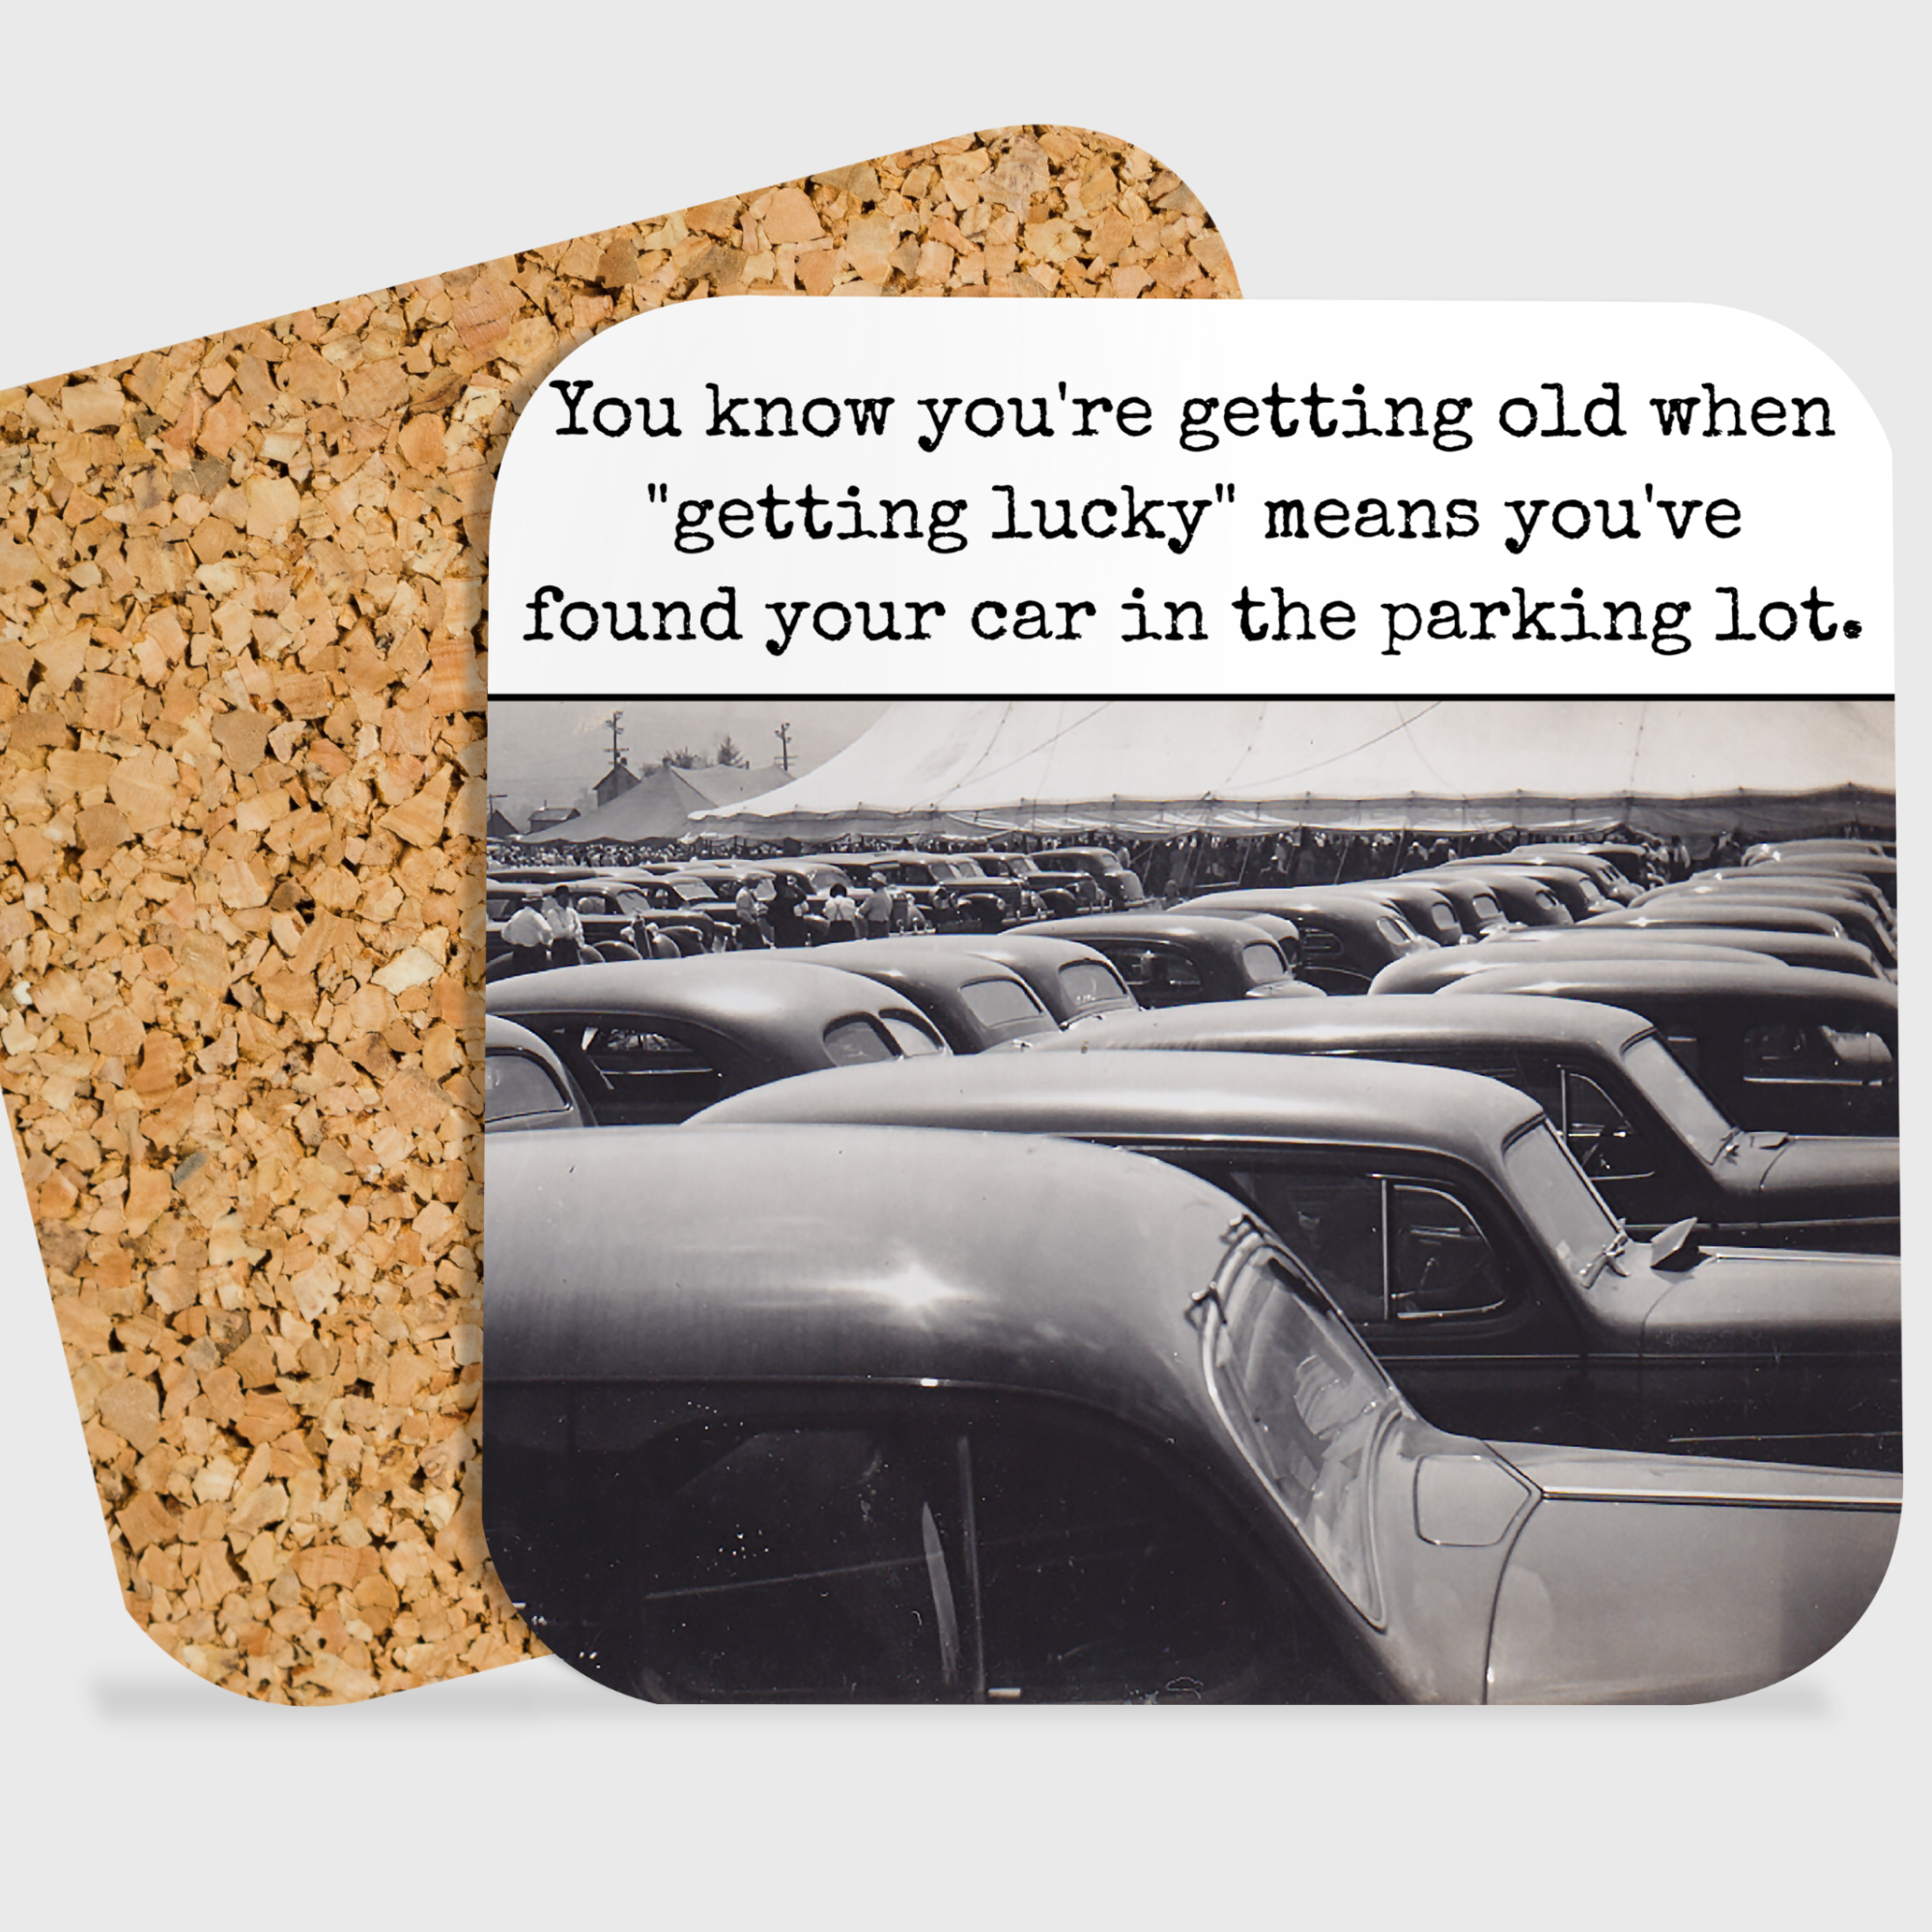 COASTER. "Getting Lucky" Means You've Found Your Car... - 0